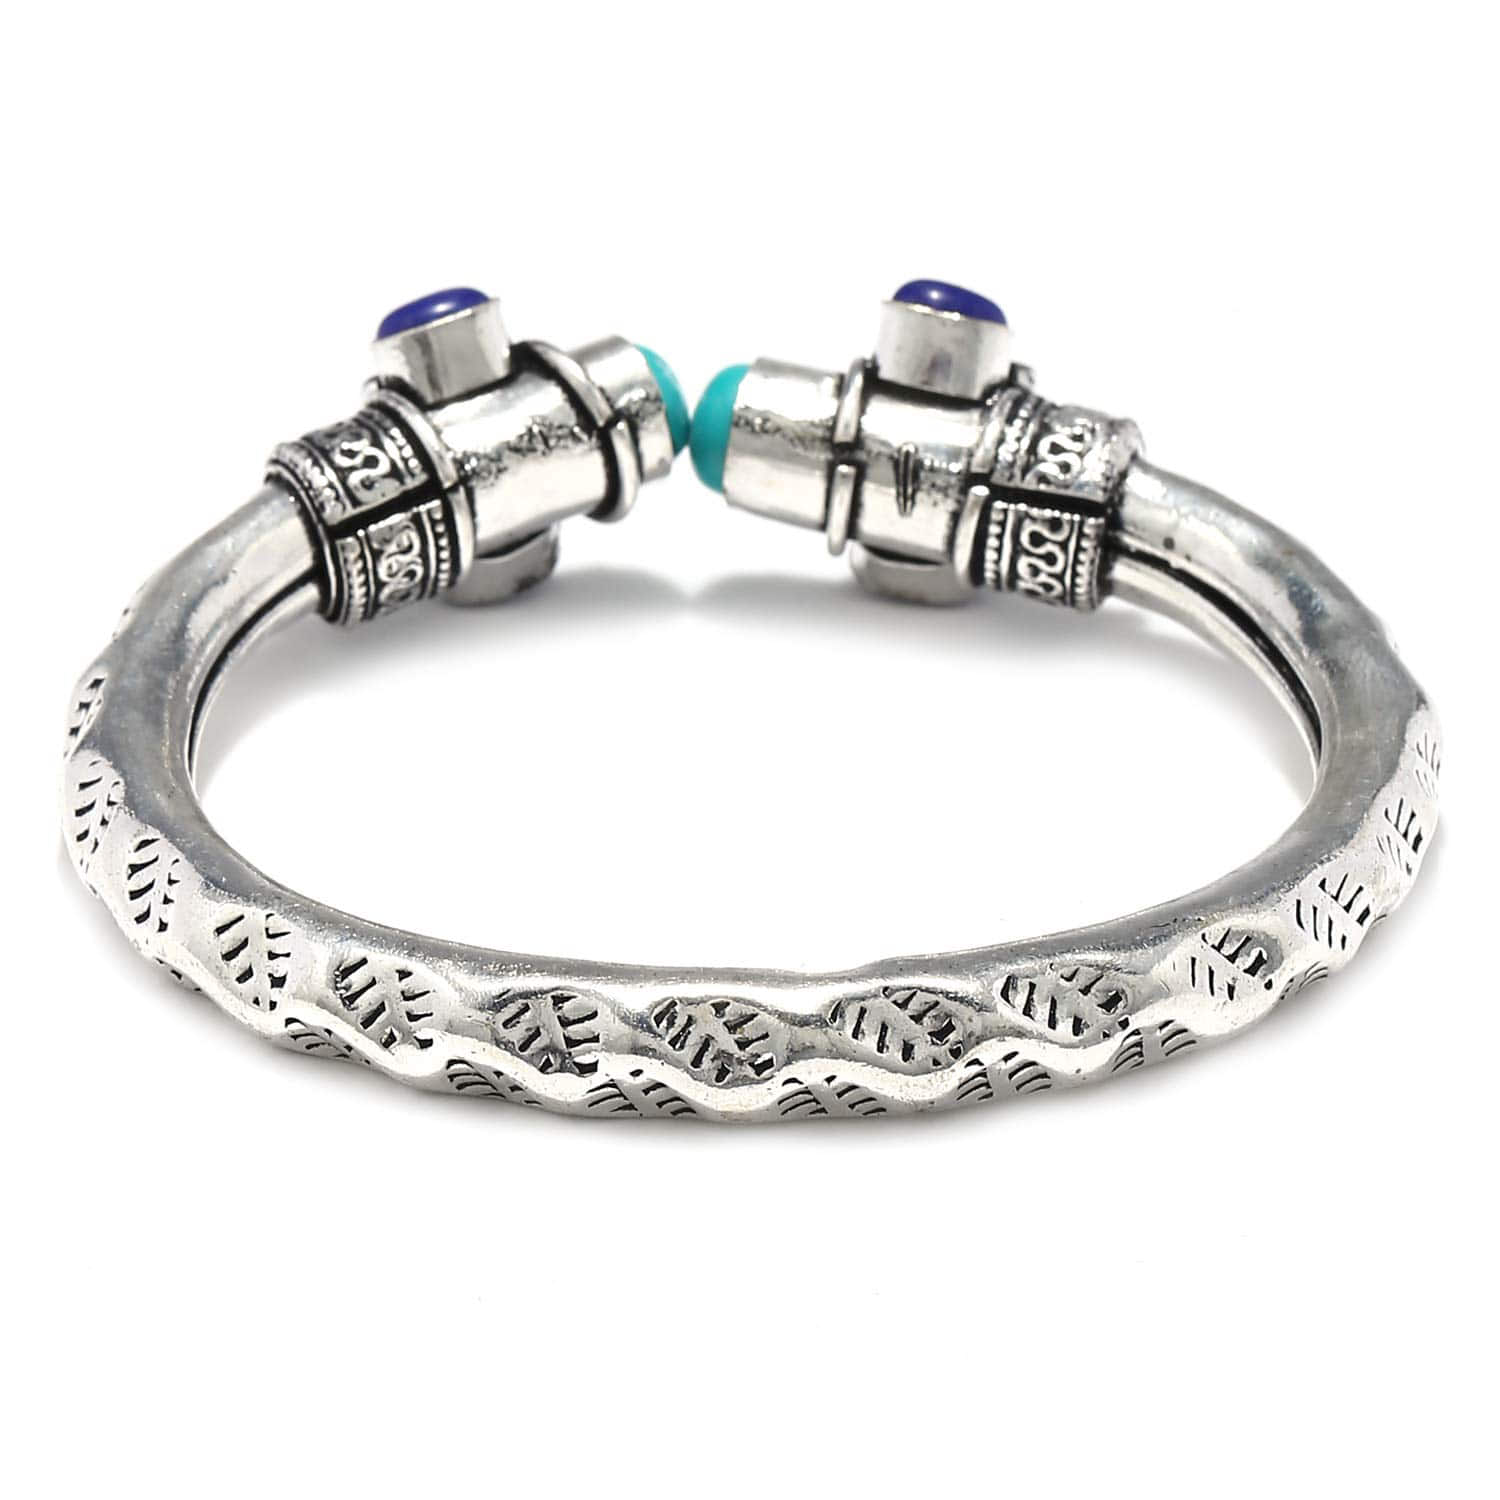 Rajasthan Tribal Style 925 Sterling Silver Cuff Bracelet